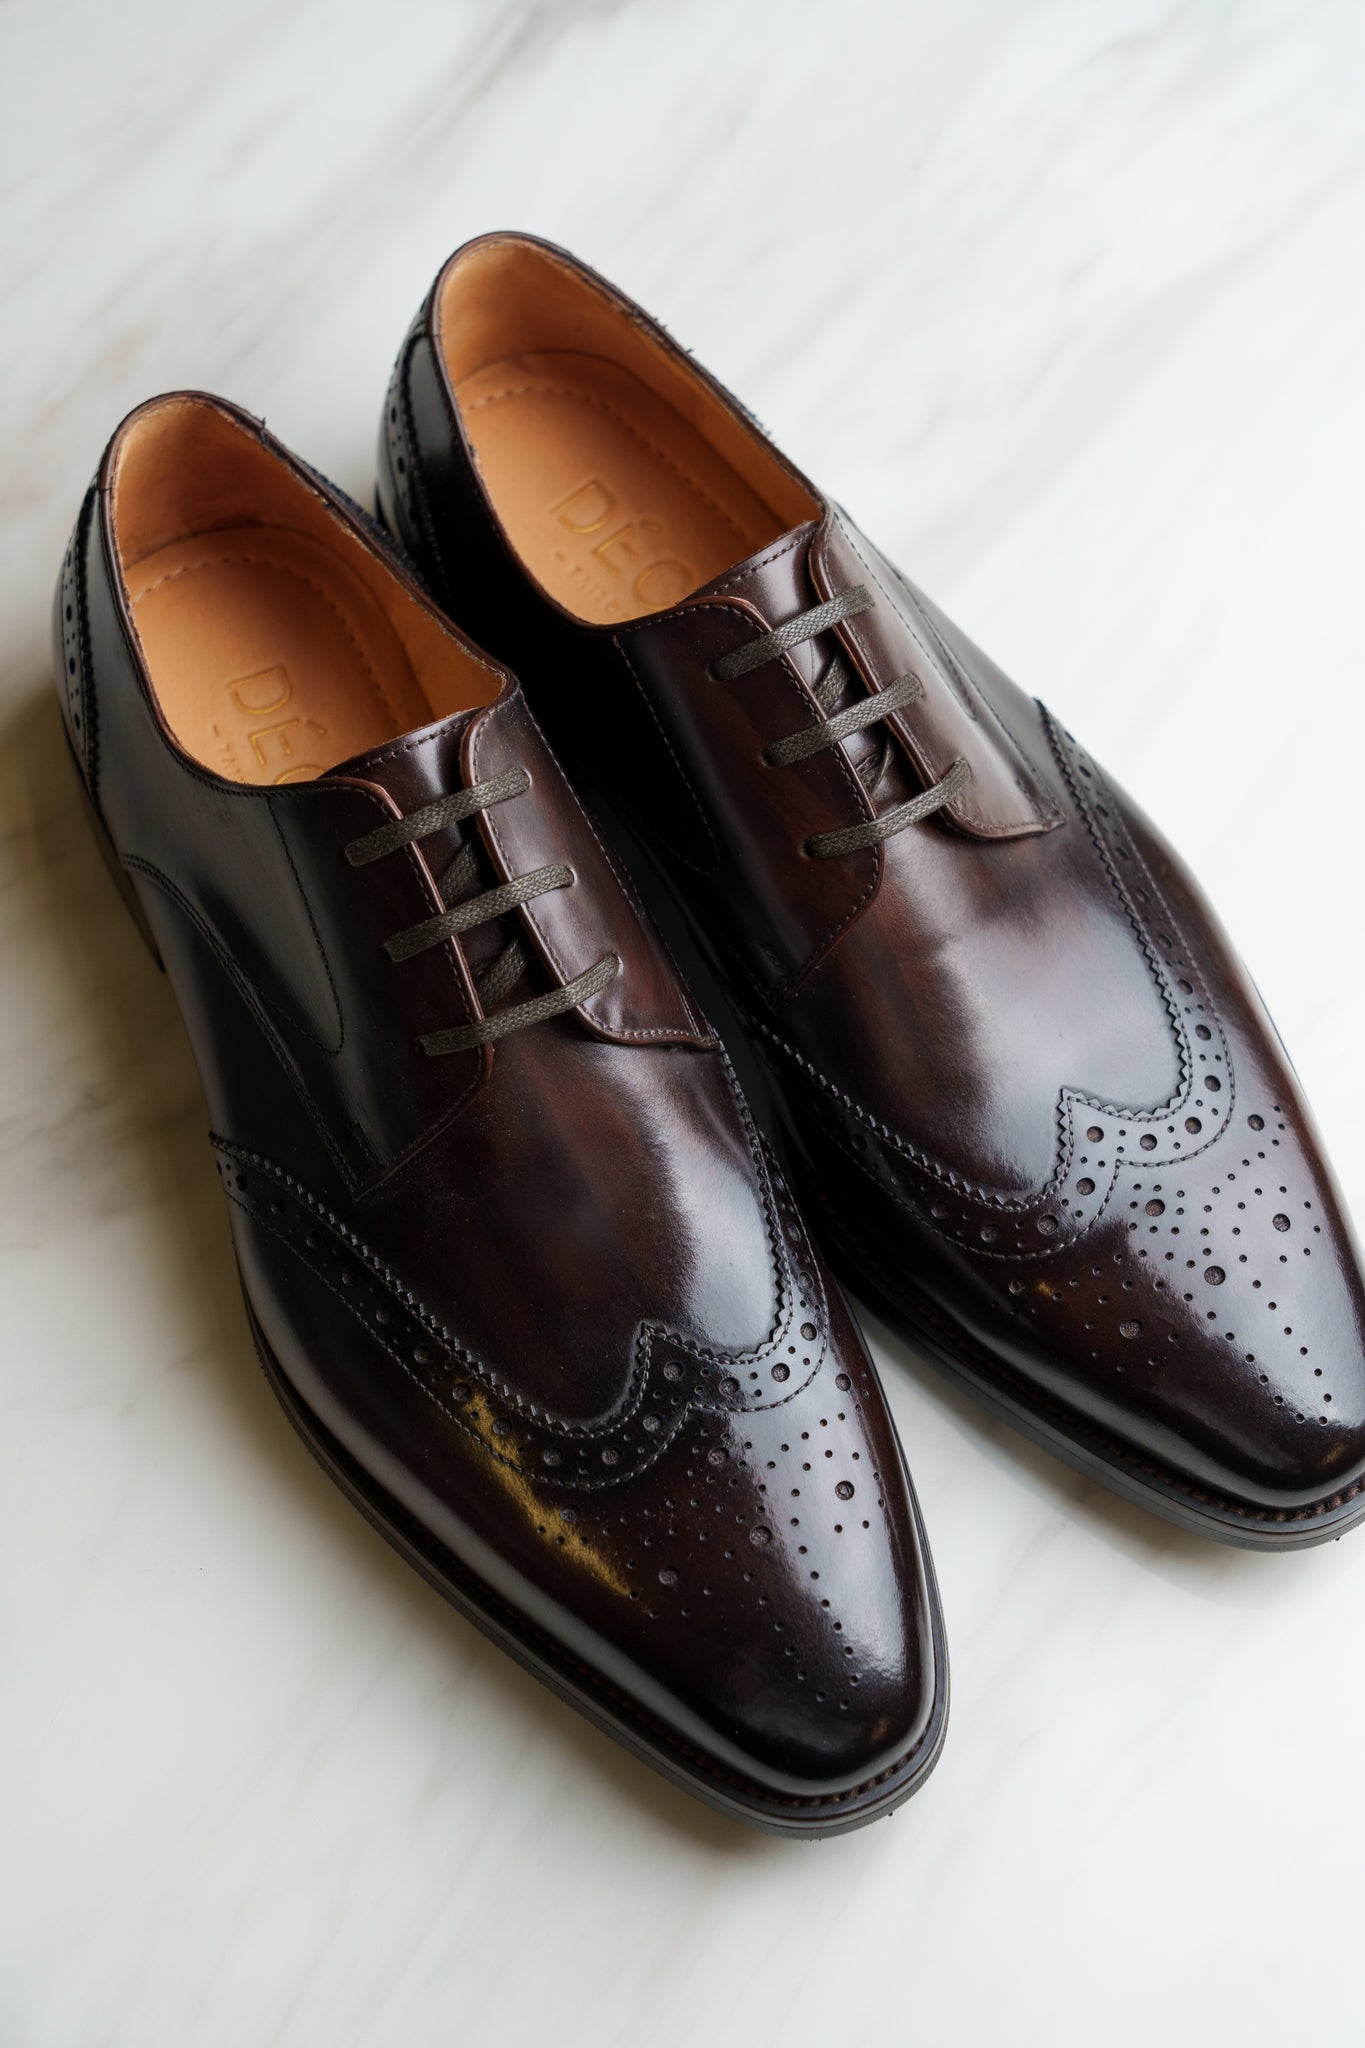 LS007BN Dark Brown Leather Shoes